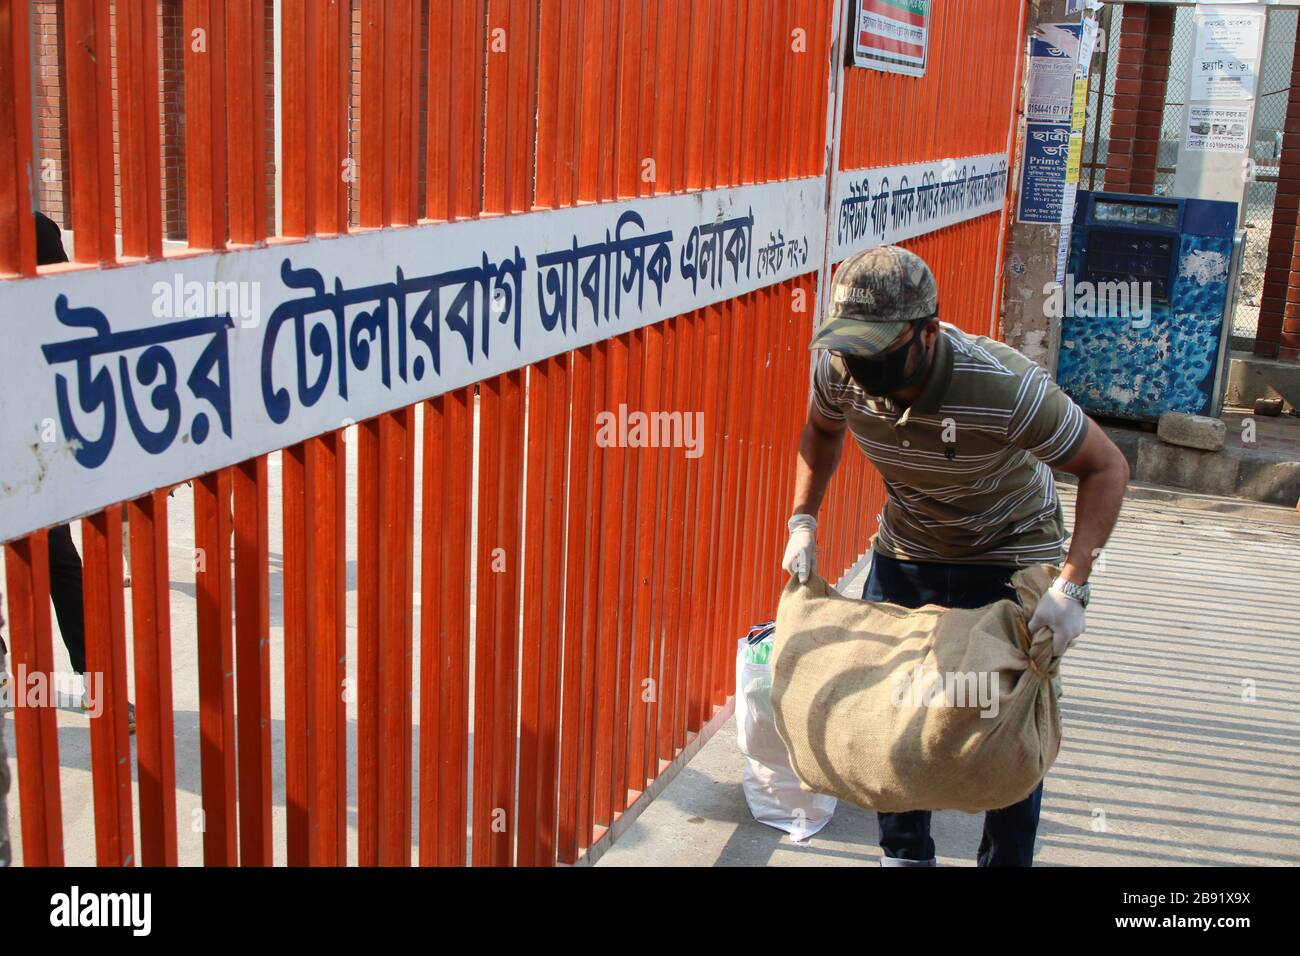 A man seen passing foods in front of locked down area amid Coronavirus fears in Dhaka.Bangladesh has reported its third death from Covid-19, a new strain of coronavirus, infection. Six new Covid-19 patients were confirmed by Institute of Epidemiology, Disease Control and Research (IEDCR). As of now, a total of 33 cases have been confirmed. Stock Photo